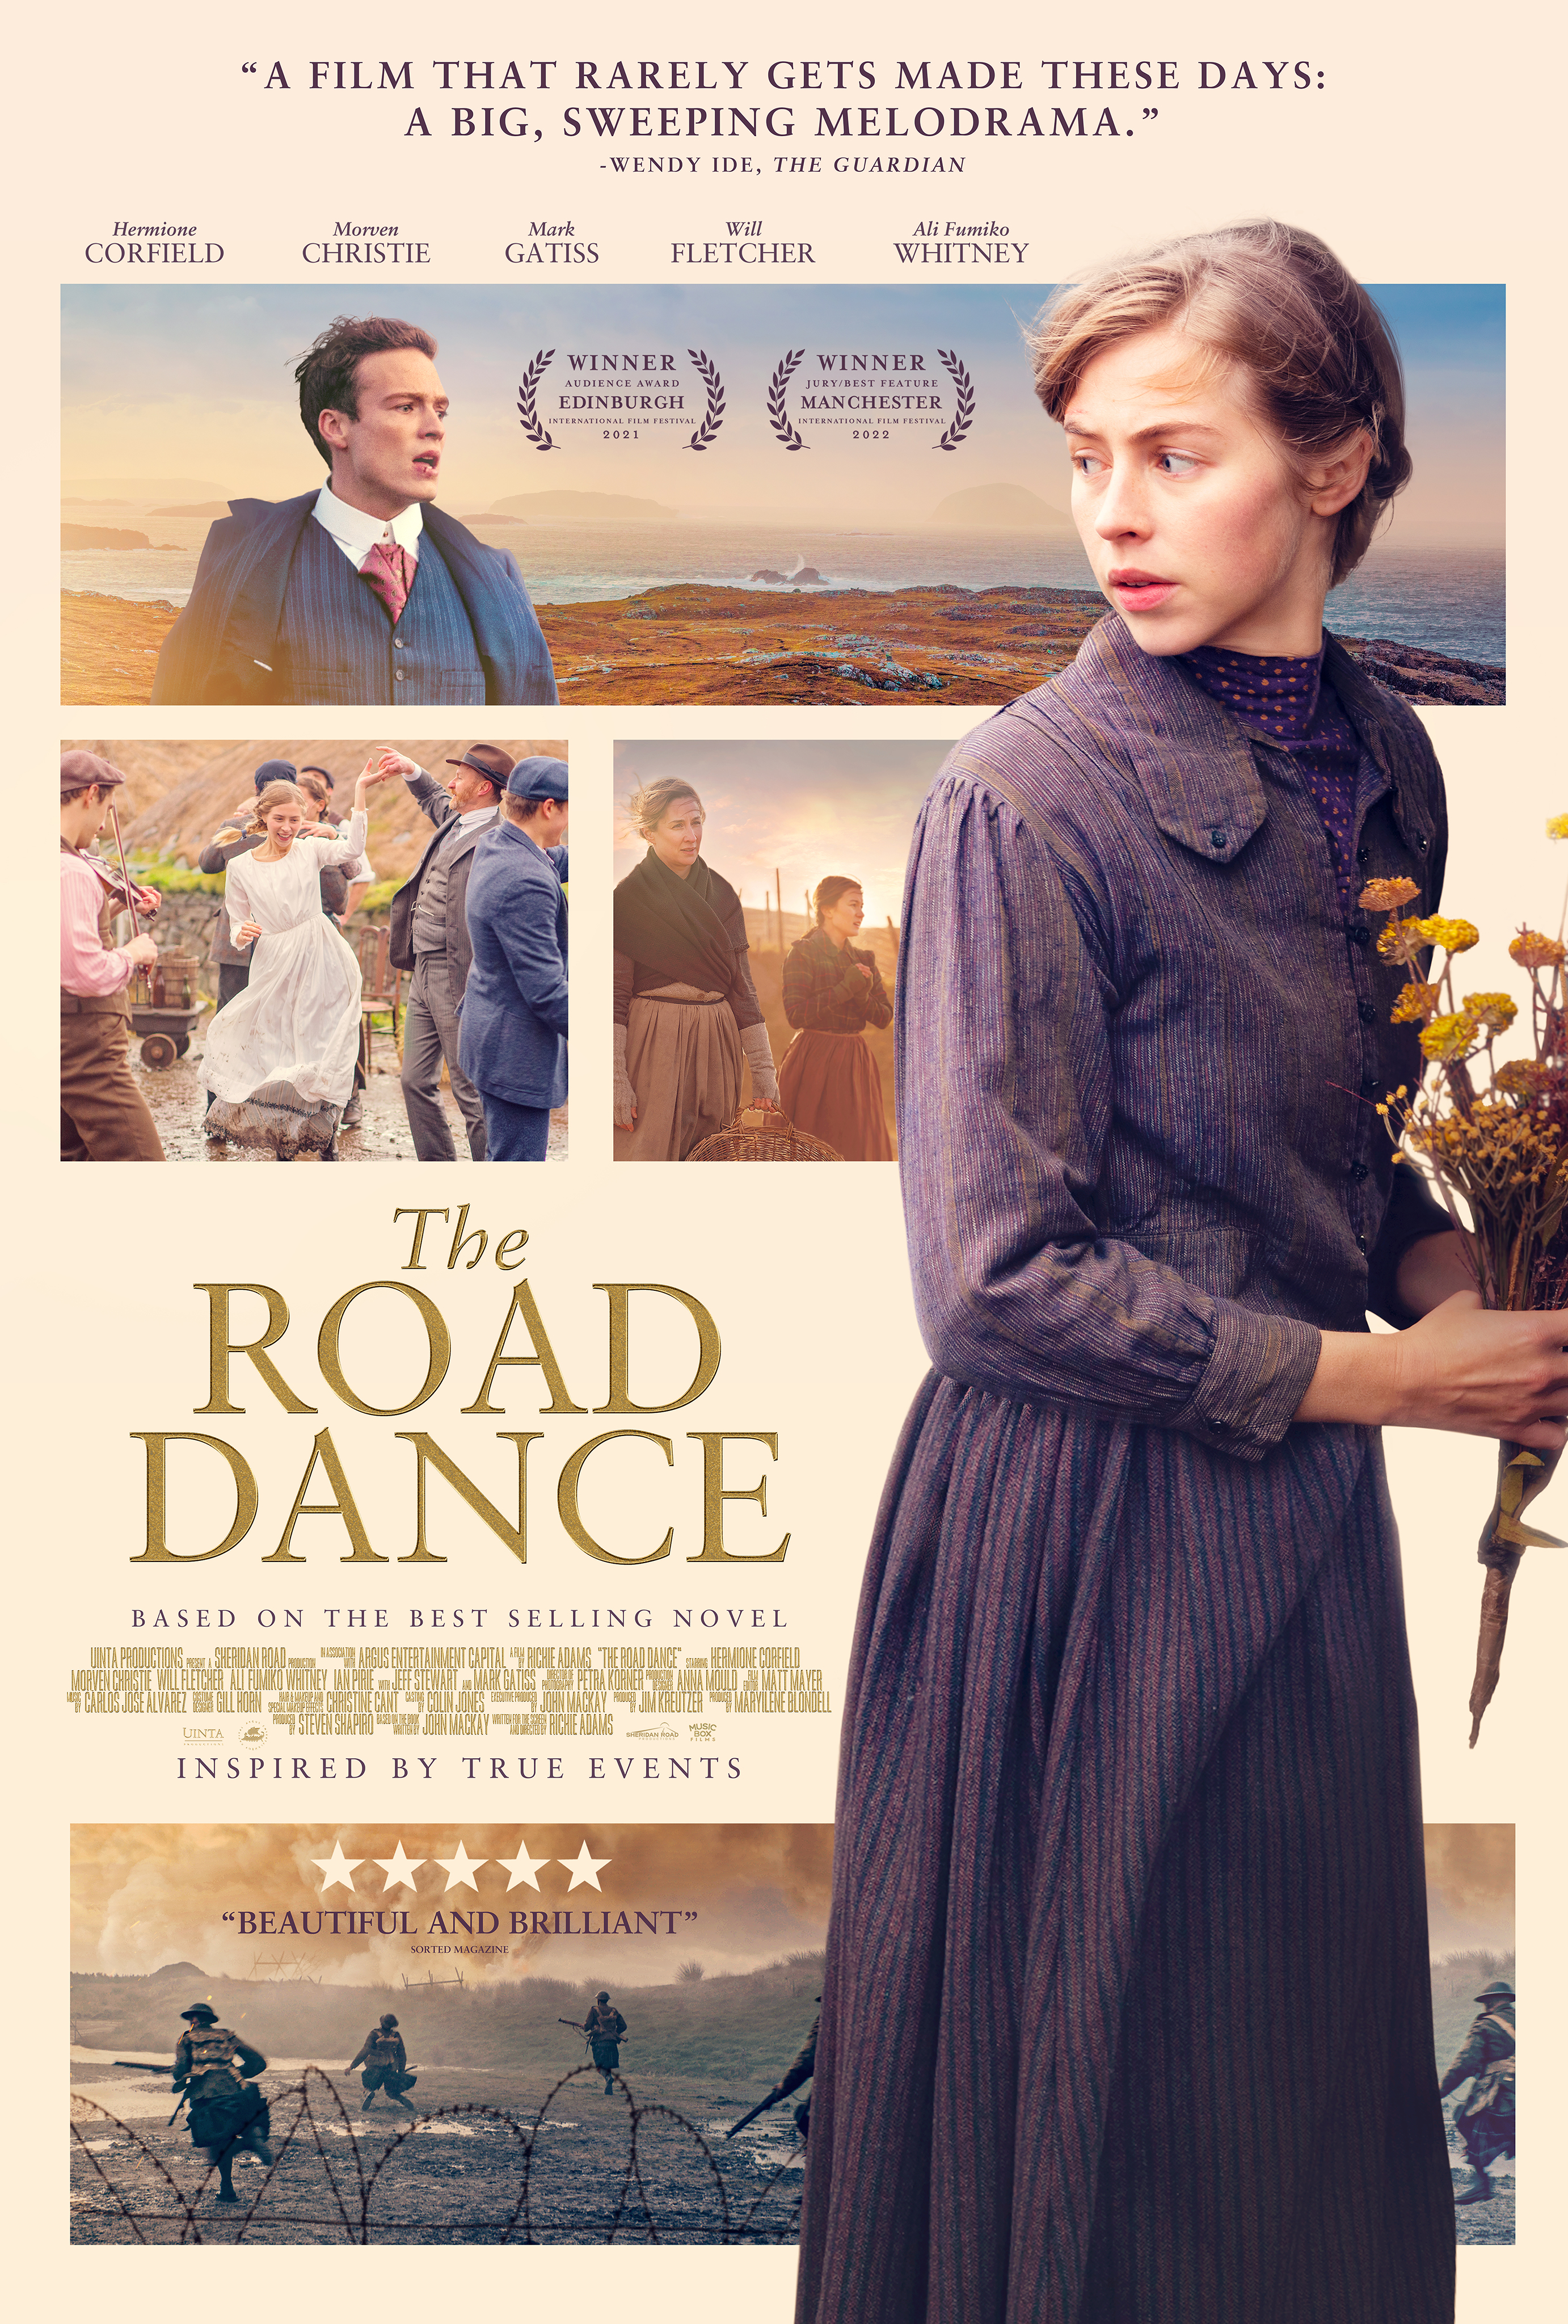 Cover Art for "The Road Dance"